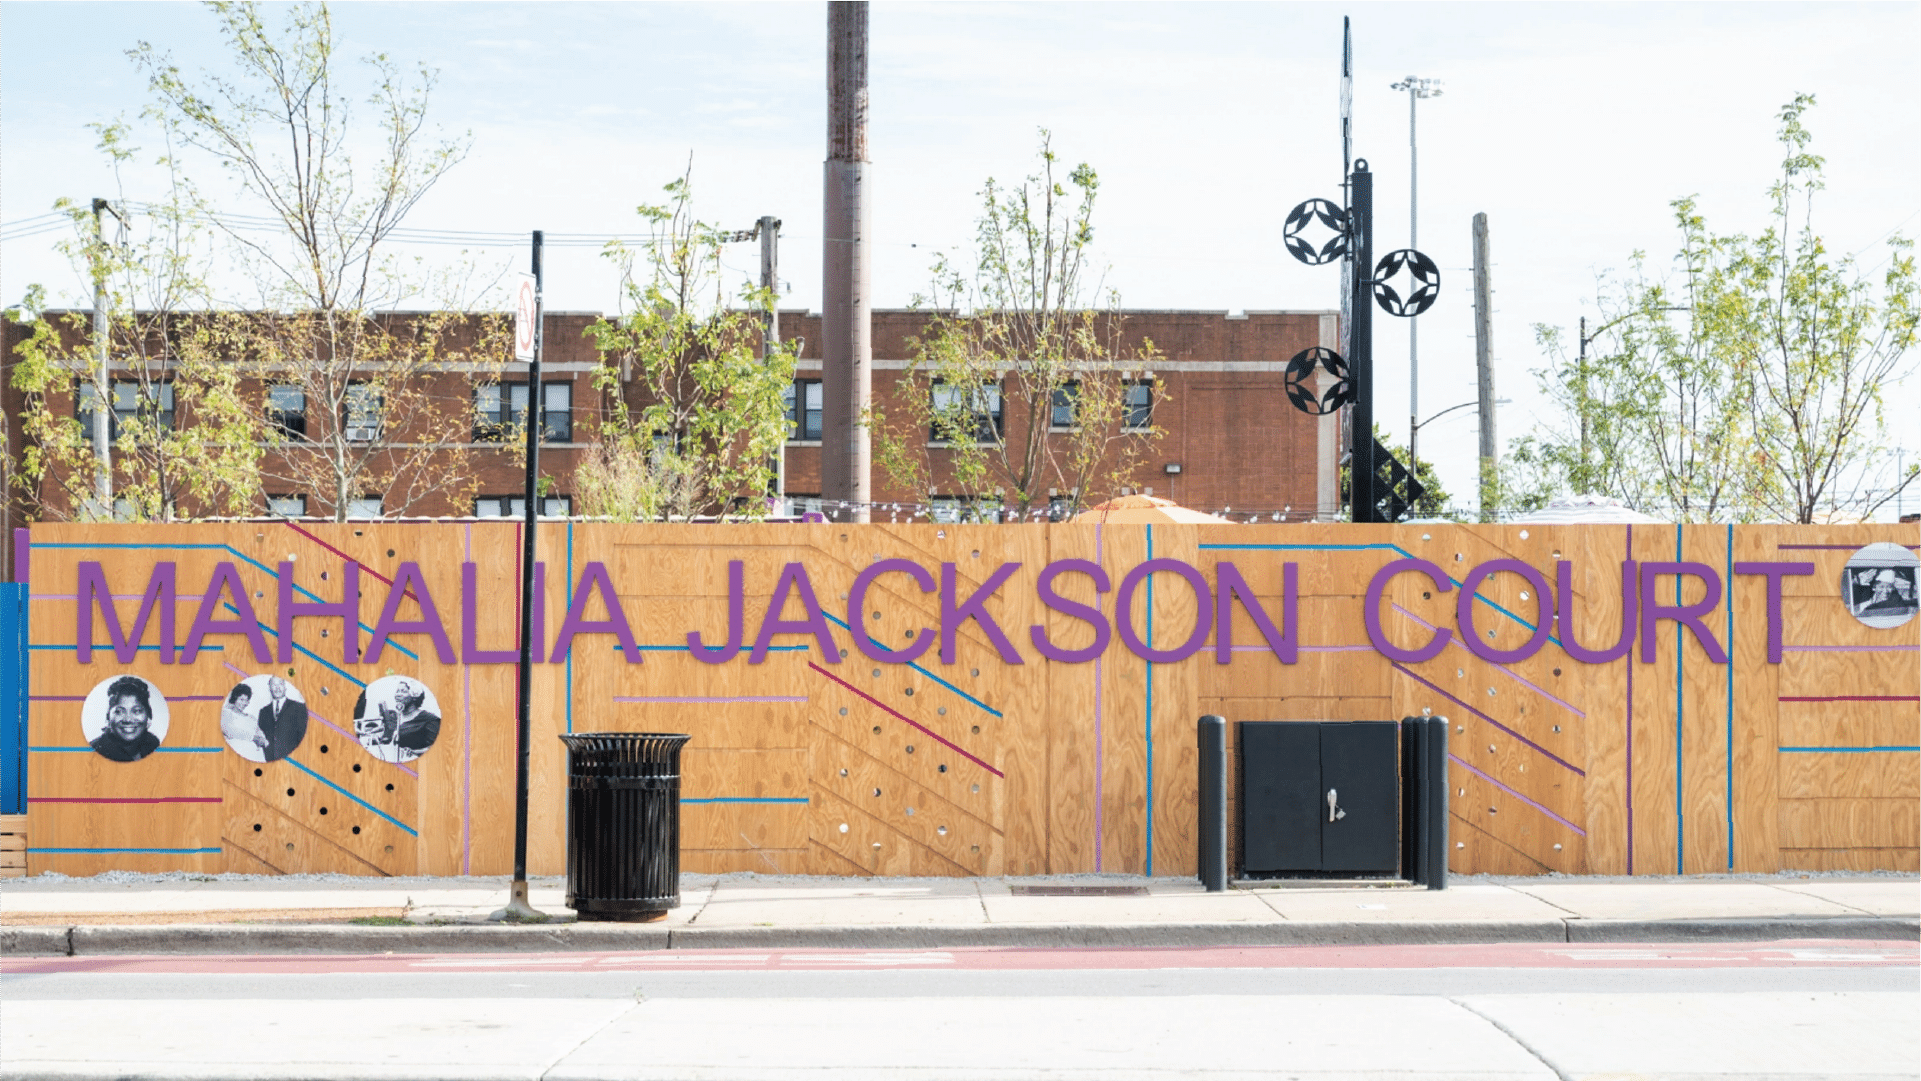 https://humanscale.org/wp-content/uploads/2022/12/Human-Scale-project-images-Mahalia-Jackson-Court-hover.png